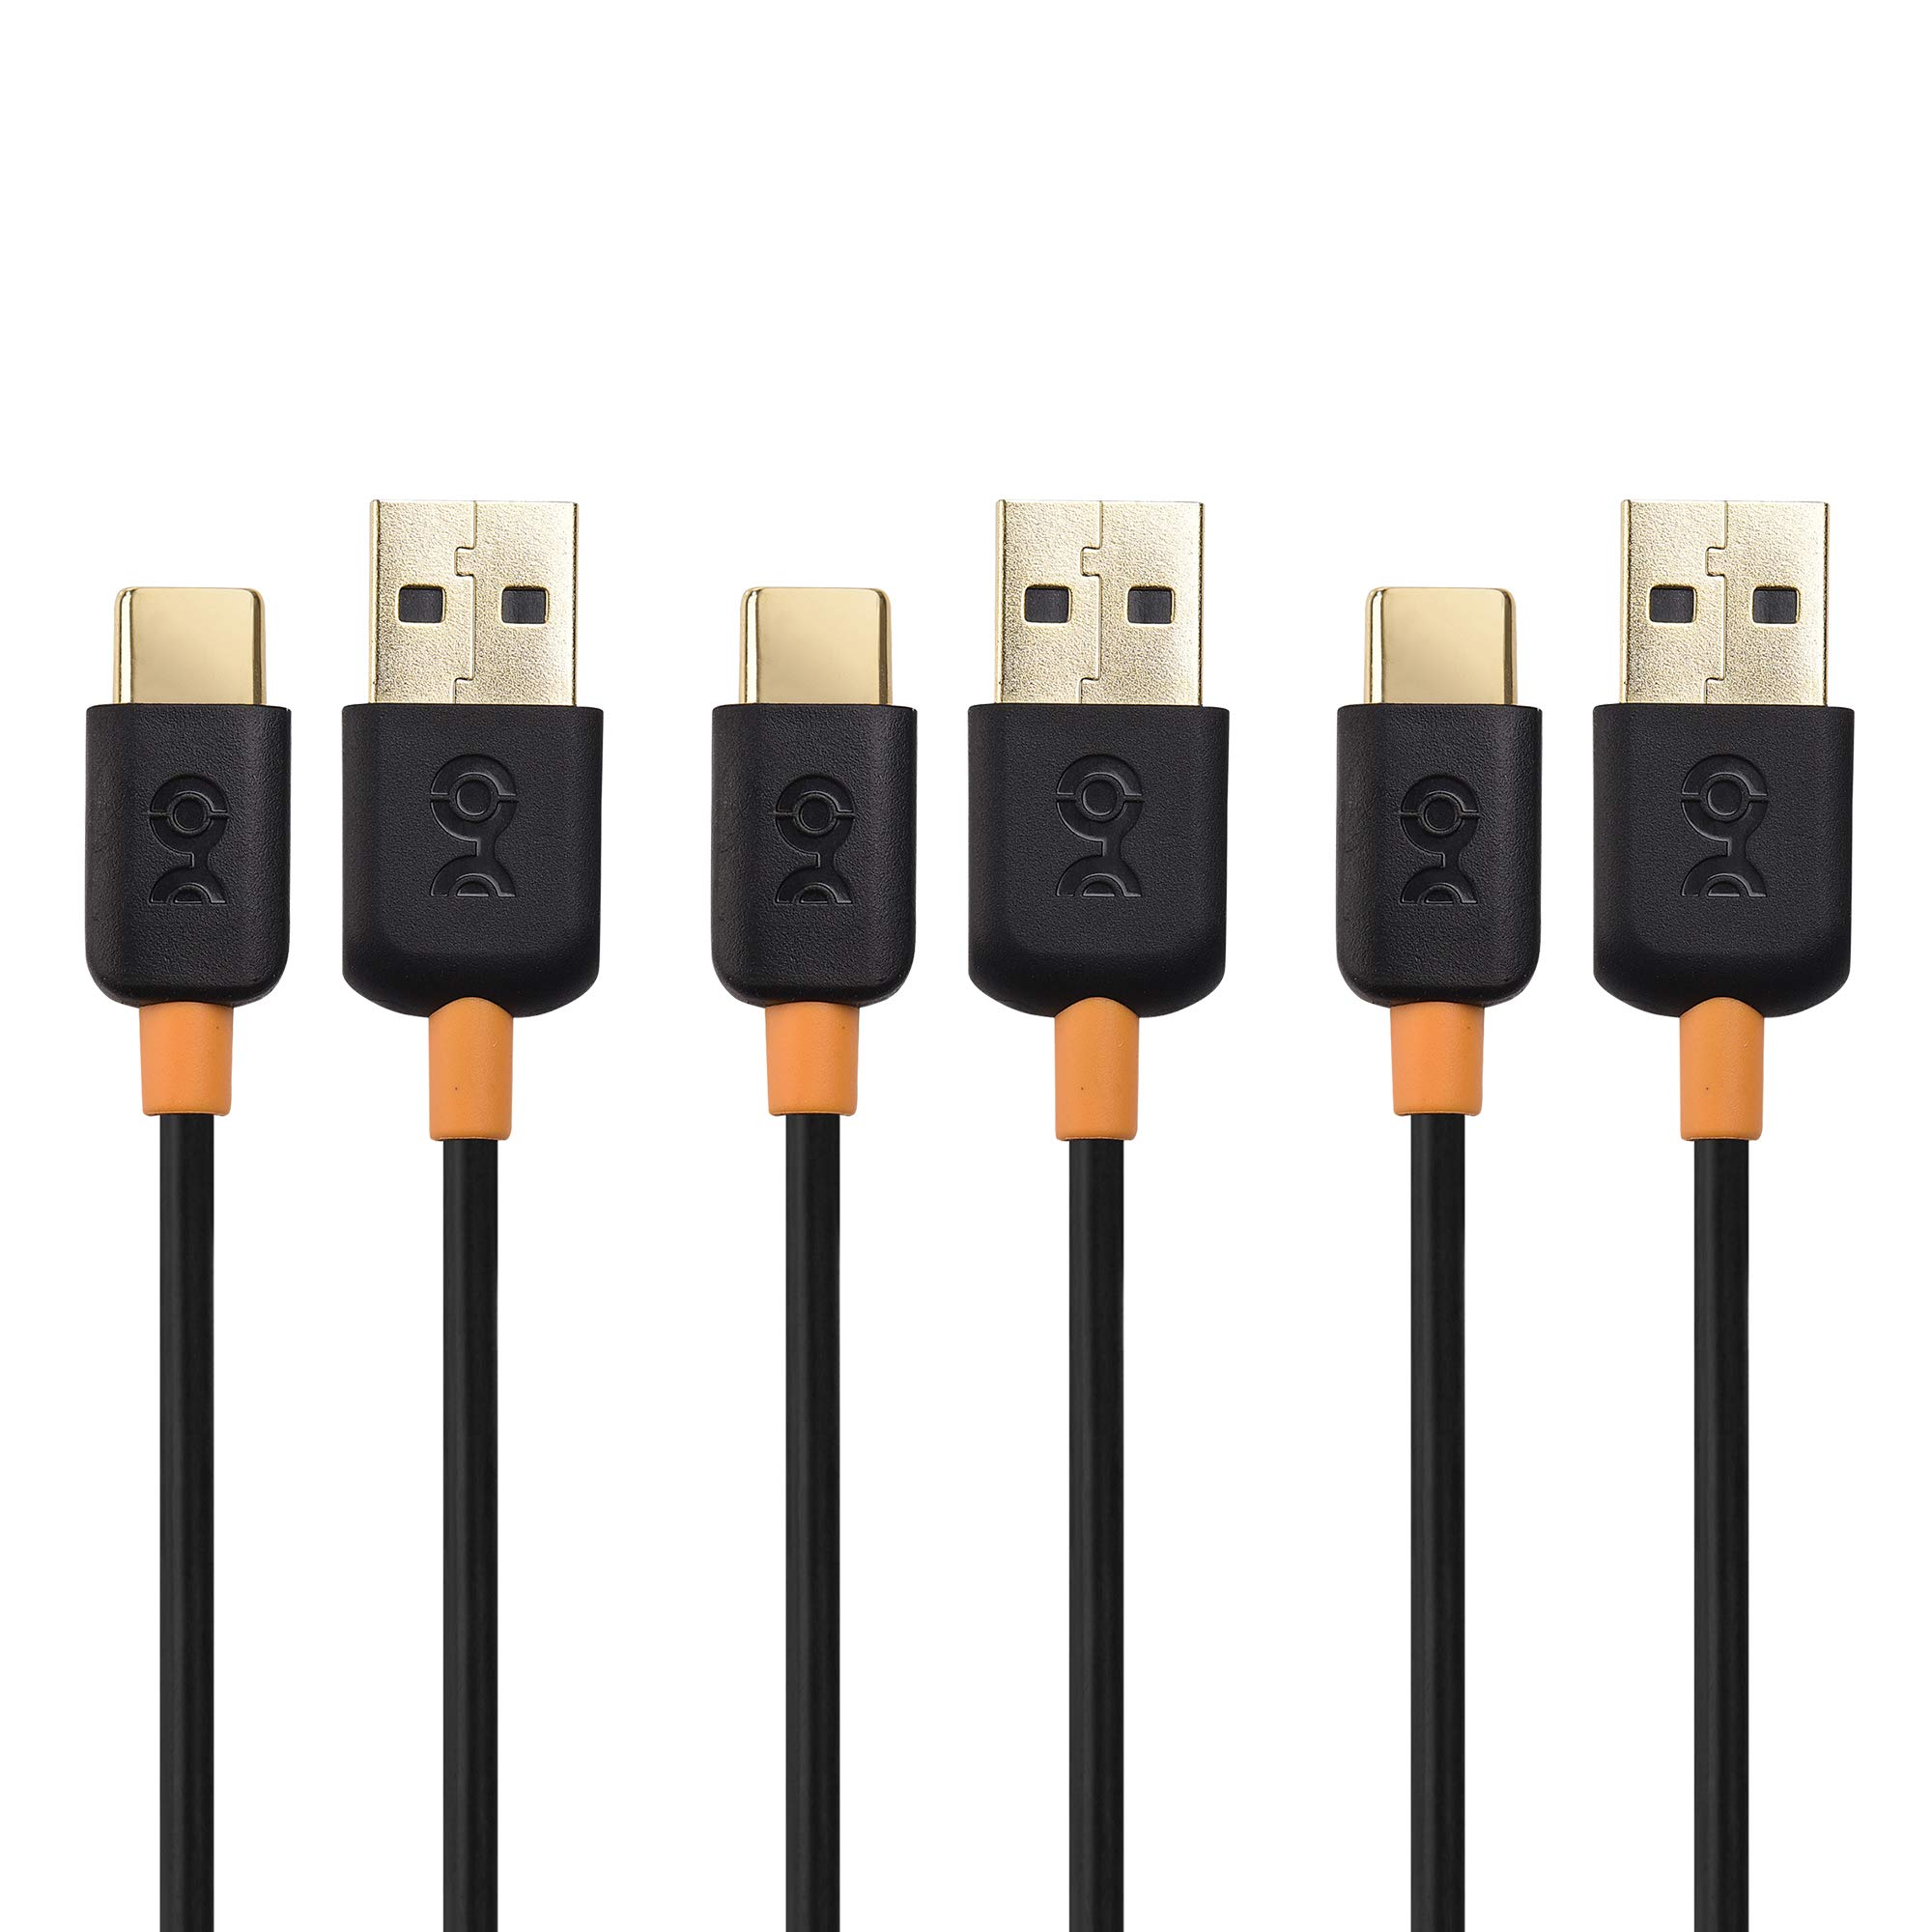 Unplugging USB cable